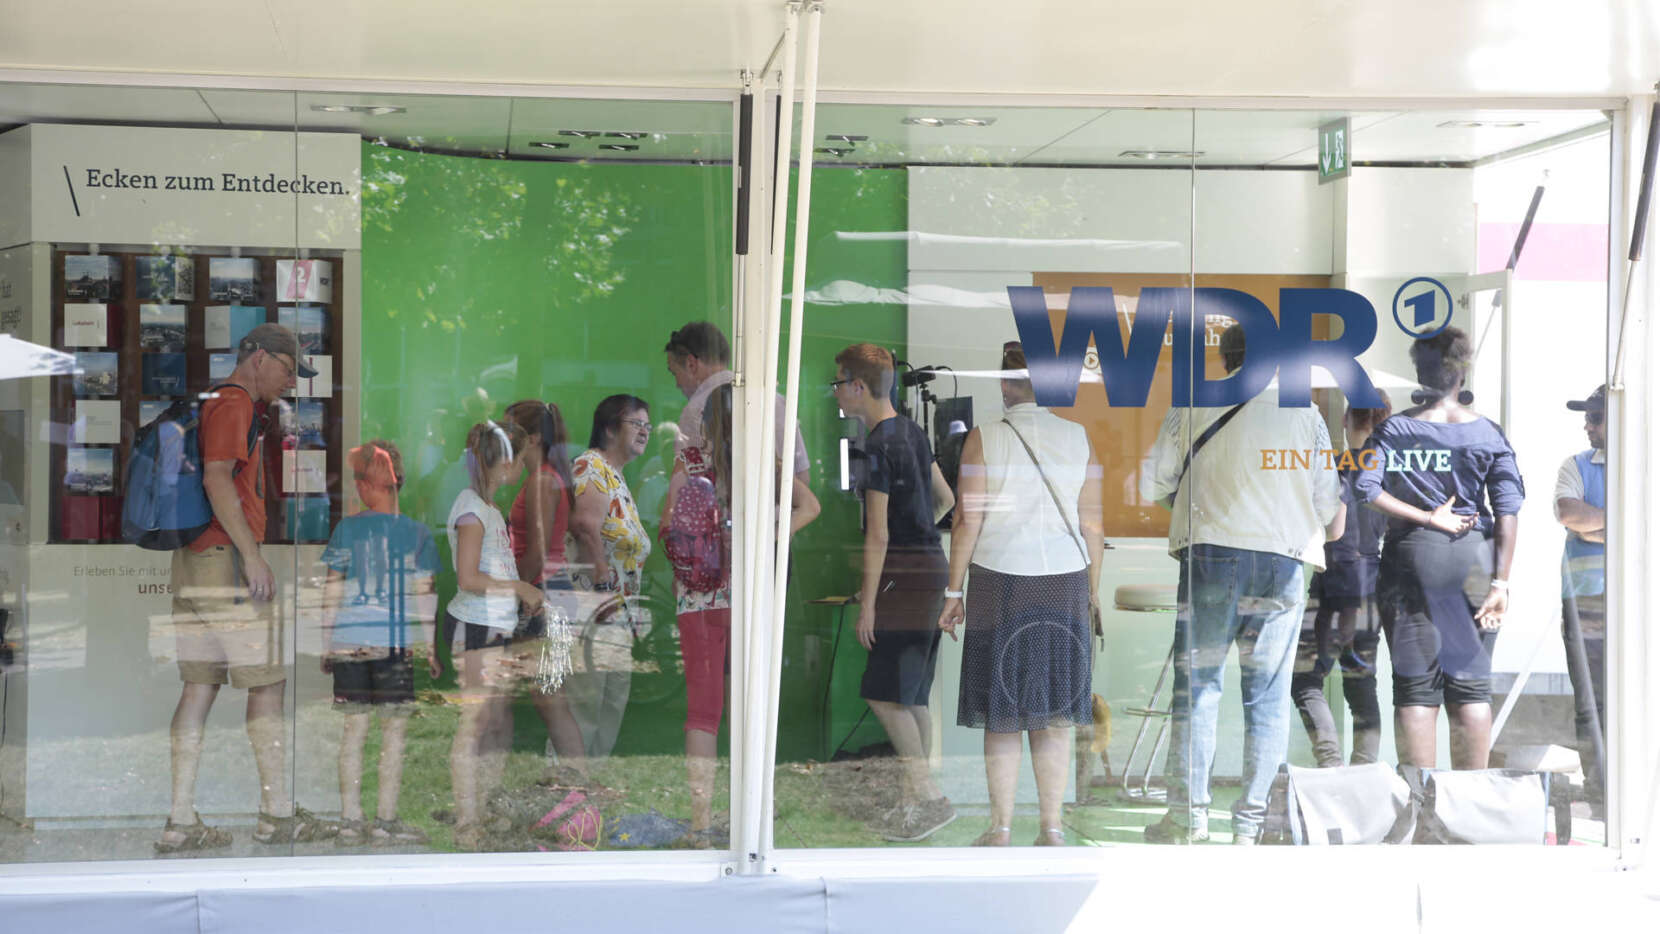 WDR-live-container.jpg